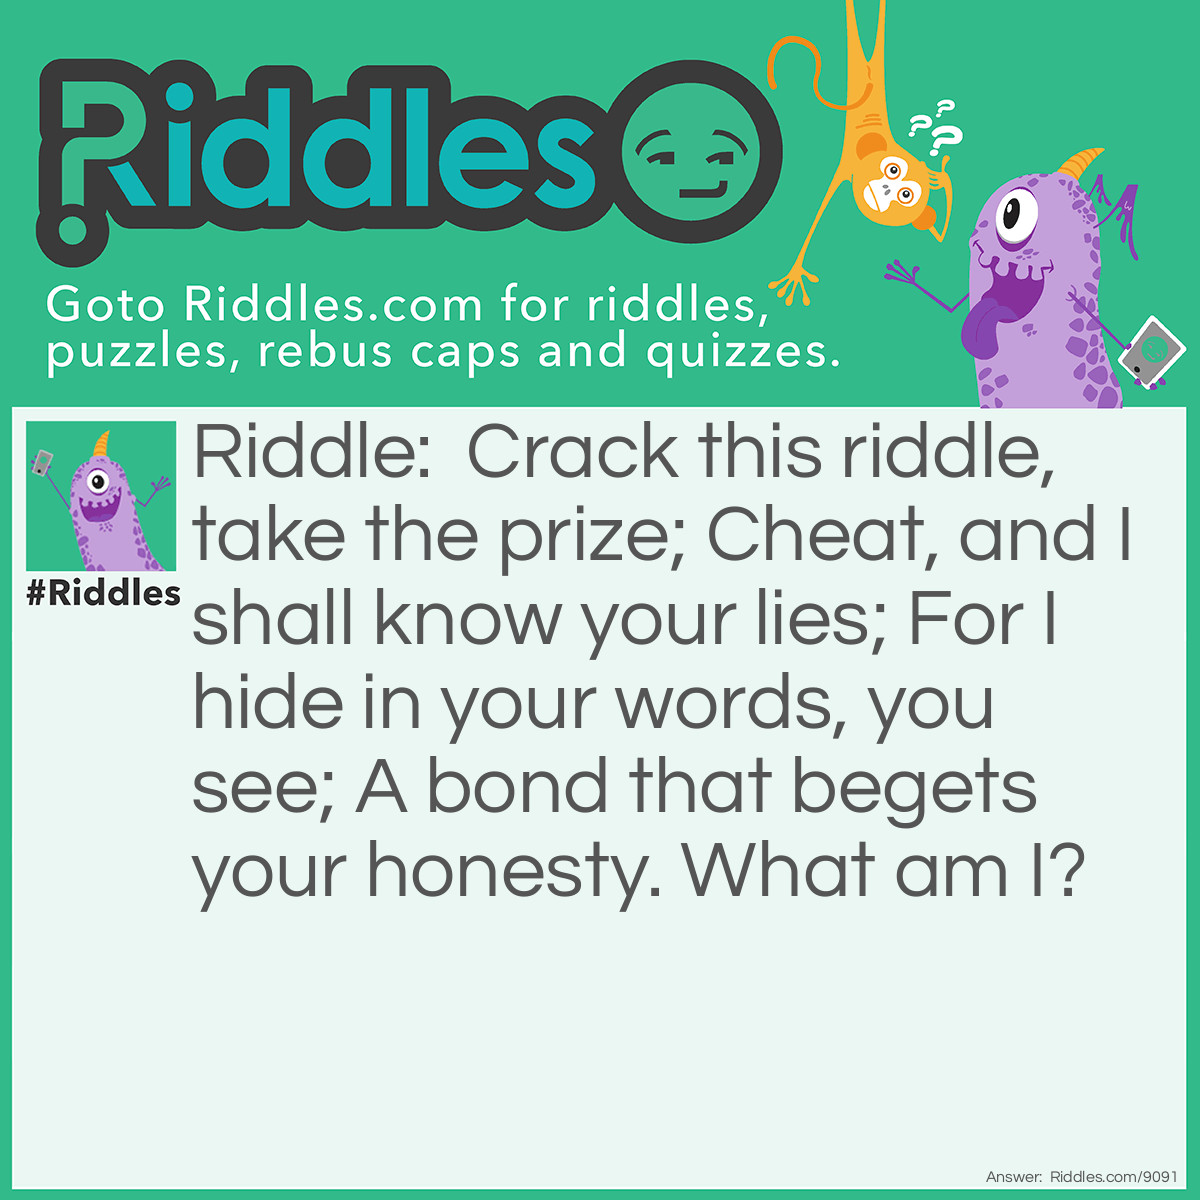 Riddle: Crack this <a href="https://www.riddles.com">riddle</a>, take the prize; Cheat, and I shall know your lies; For I hide in your words, you see; A bond that begets your honesty. What am I? Answer: Truth.